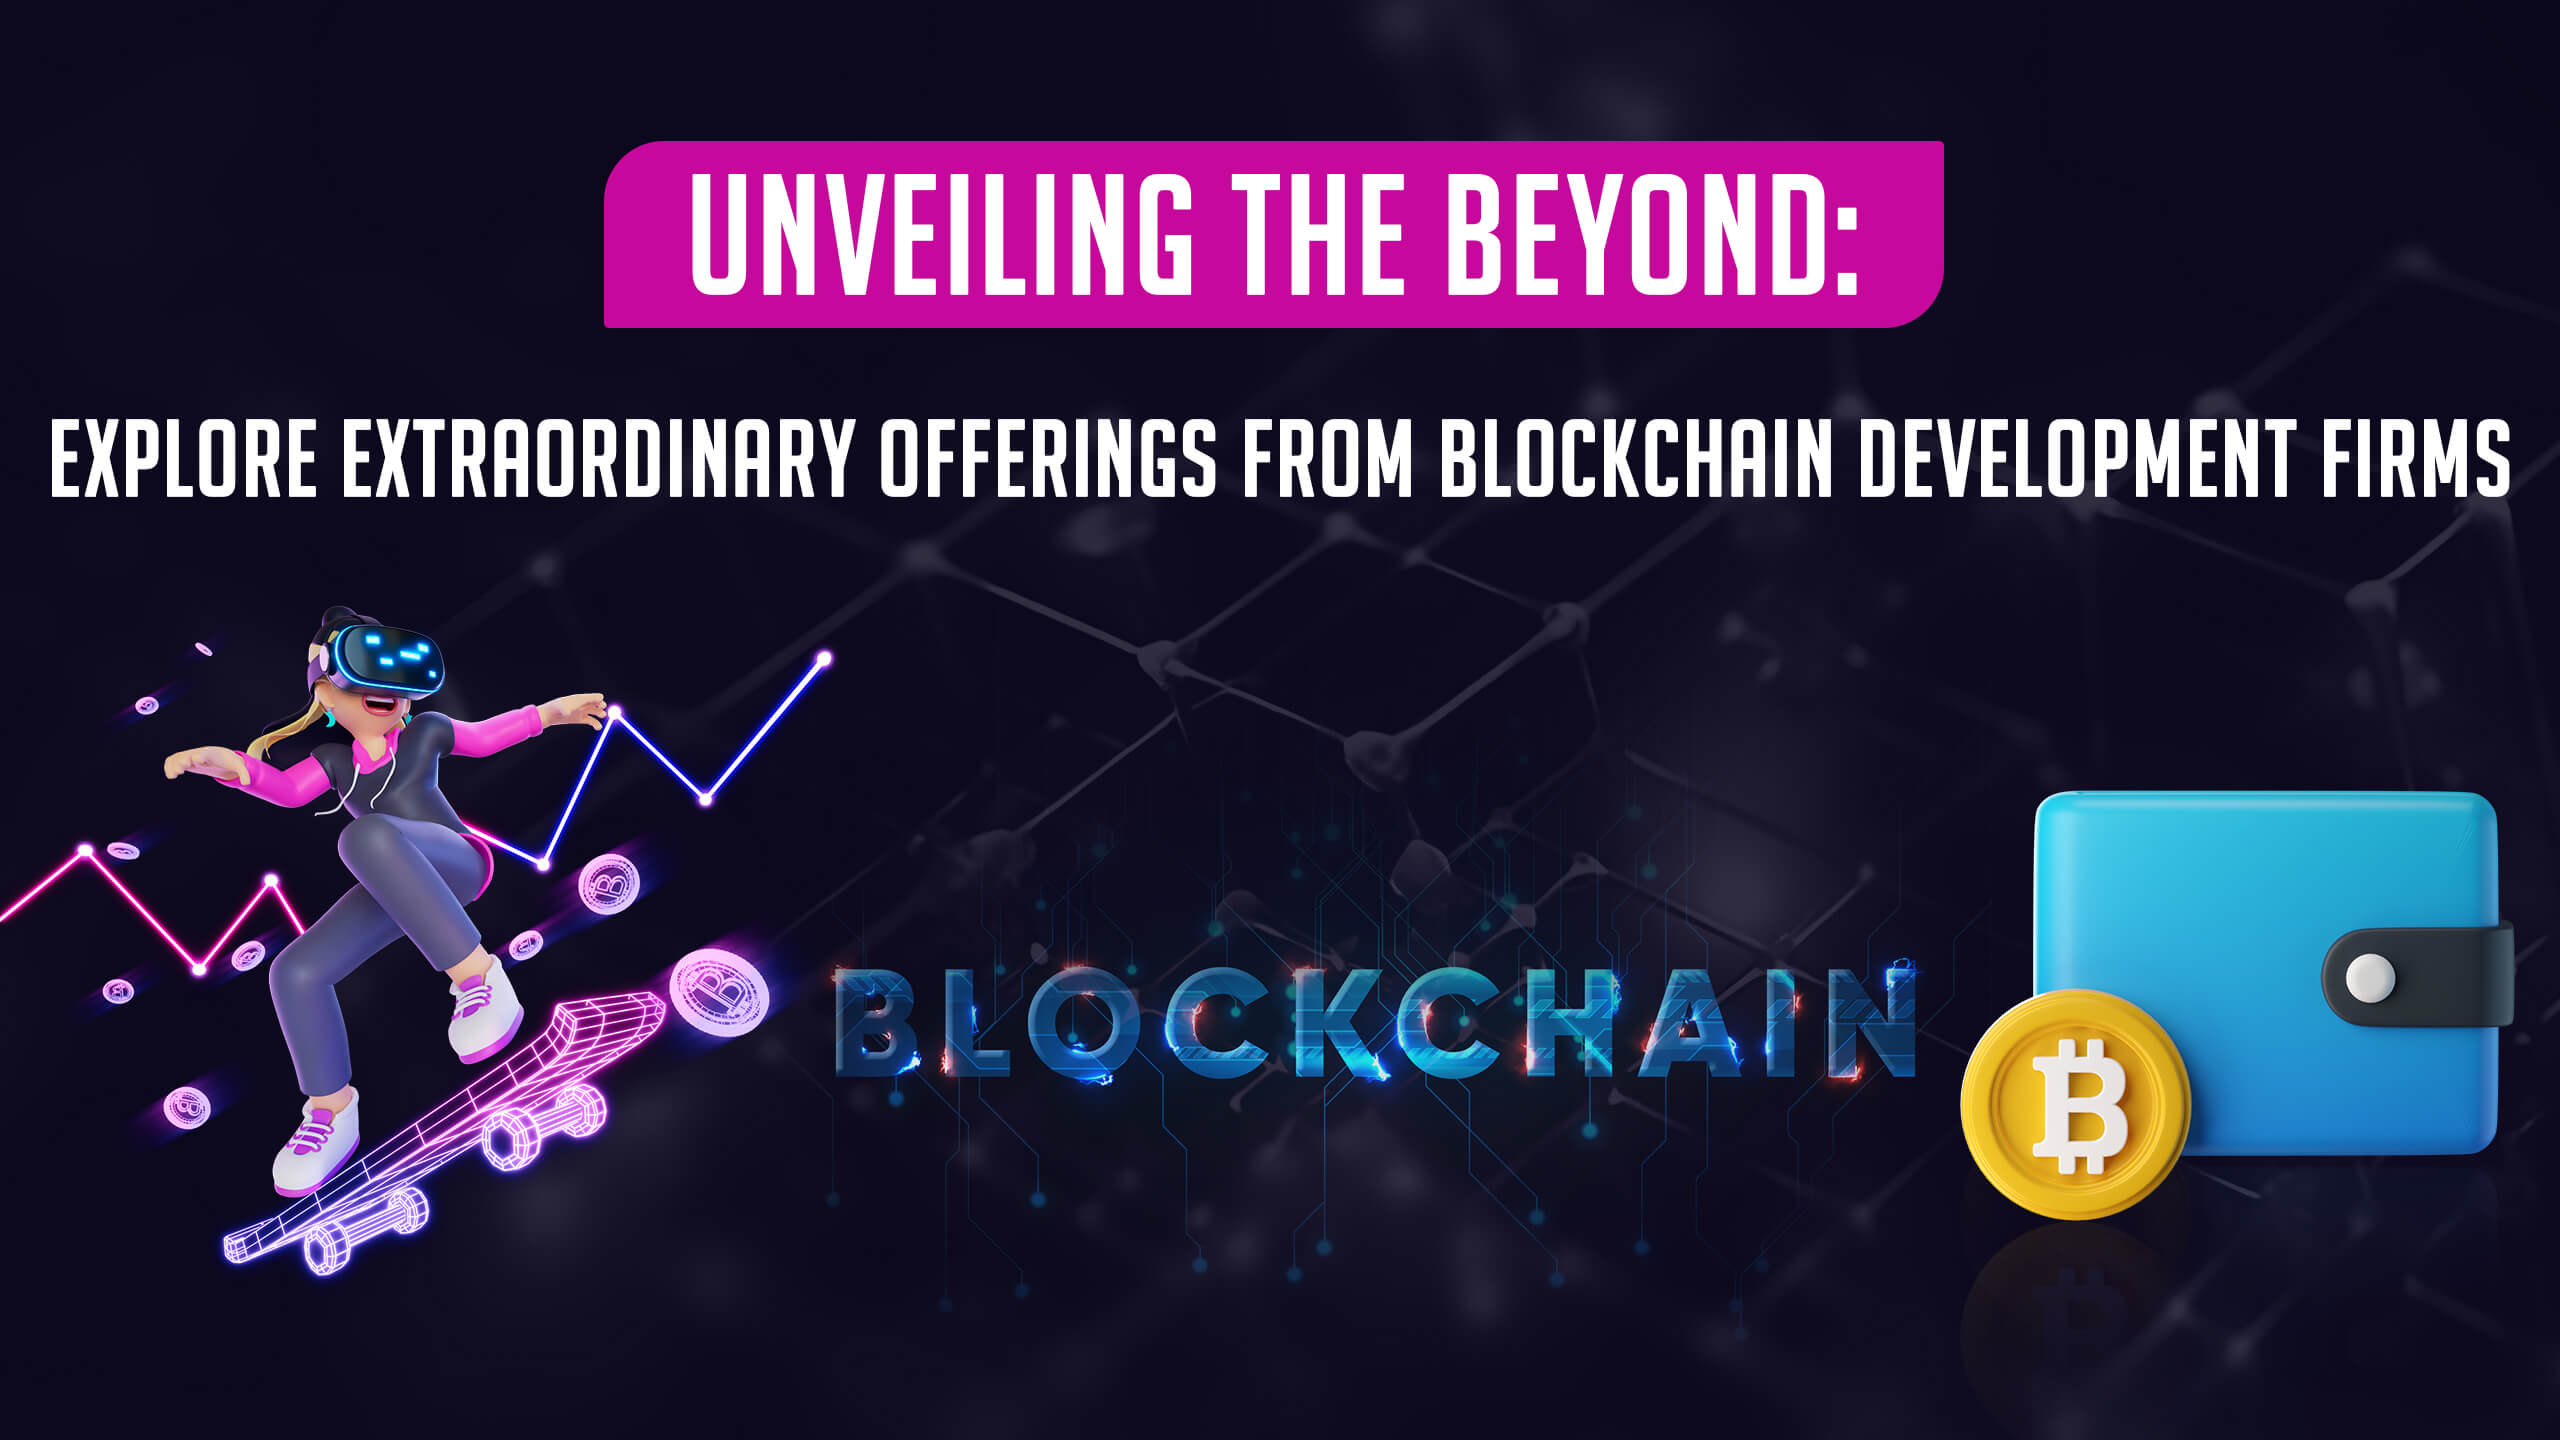 Additional Offerings from Blockchain Development Companies